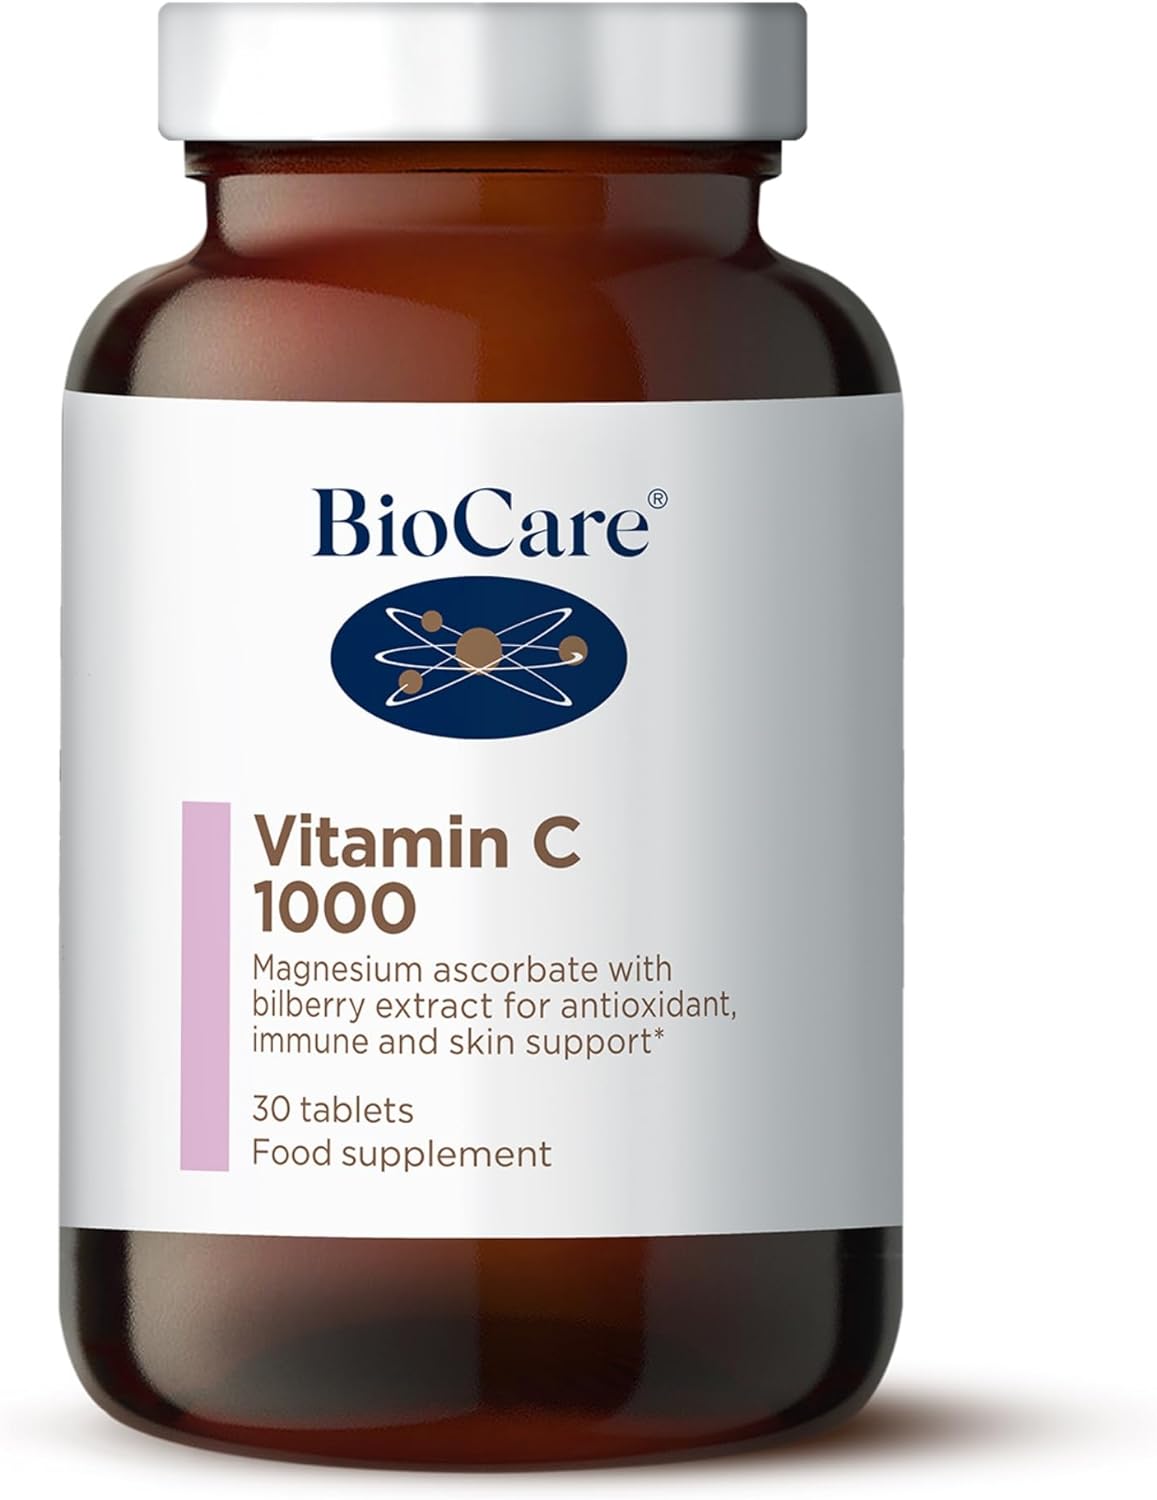 BioCare Vitamin C 1000mg | with Bilberry Extract | Antioxidant, Immune150 Grams